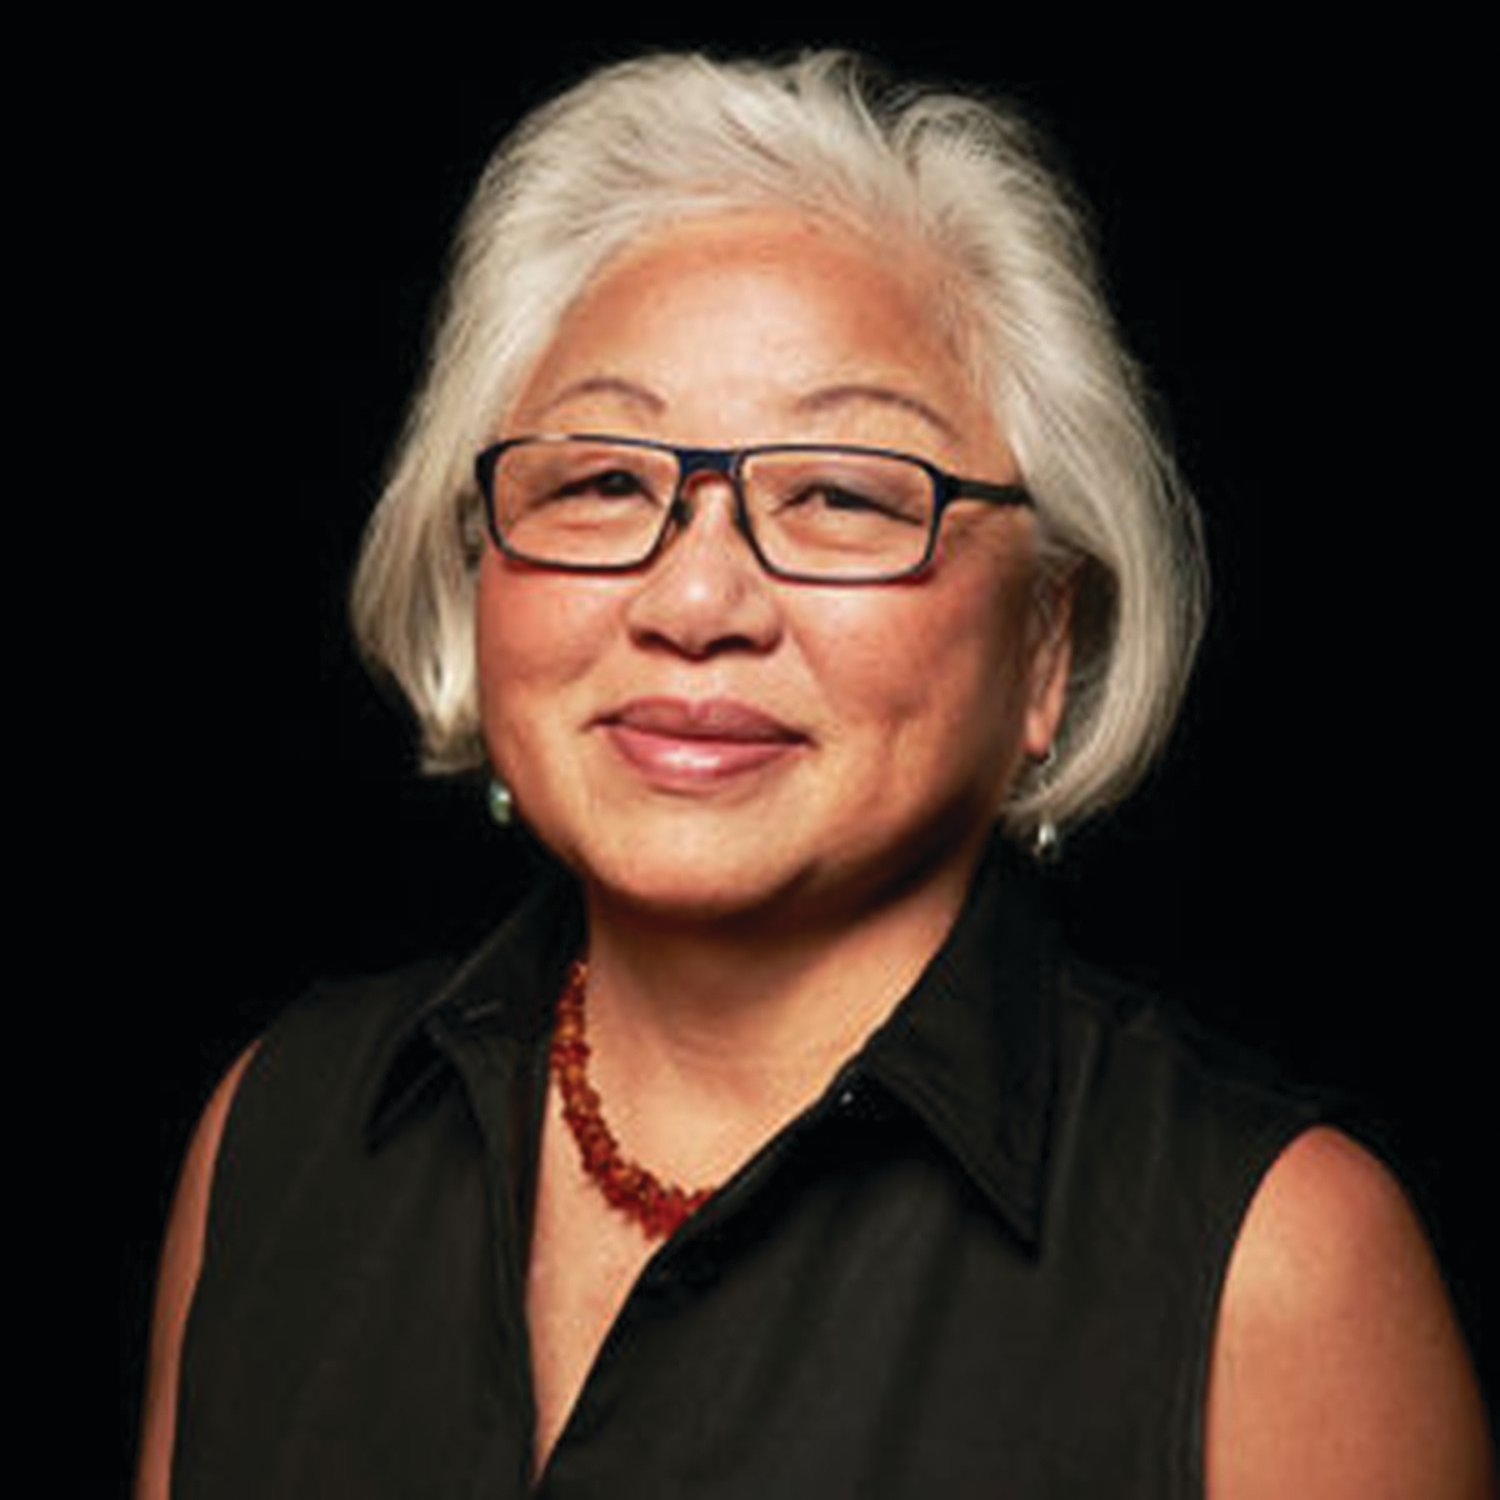 Mayumi Tsutakawa will discuss “Washington’s Undiscovered Feminists” during a special Zoom presentation for the September First Friday event at 
7 p.m. Friday, Sept. 4.